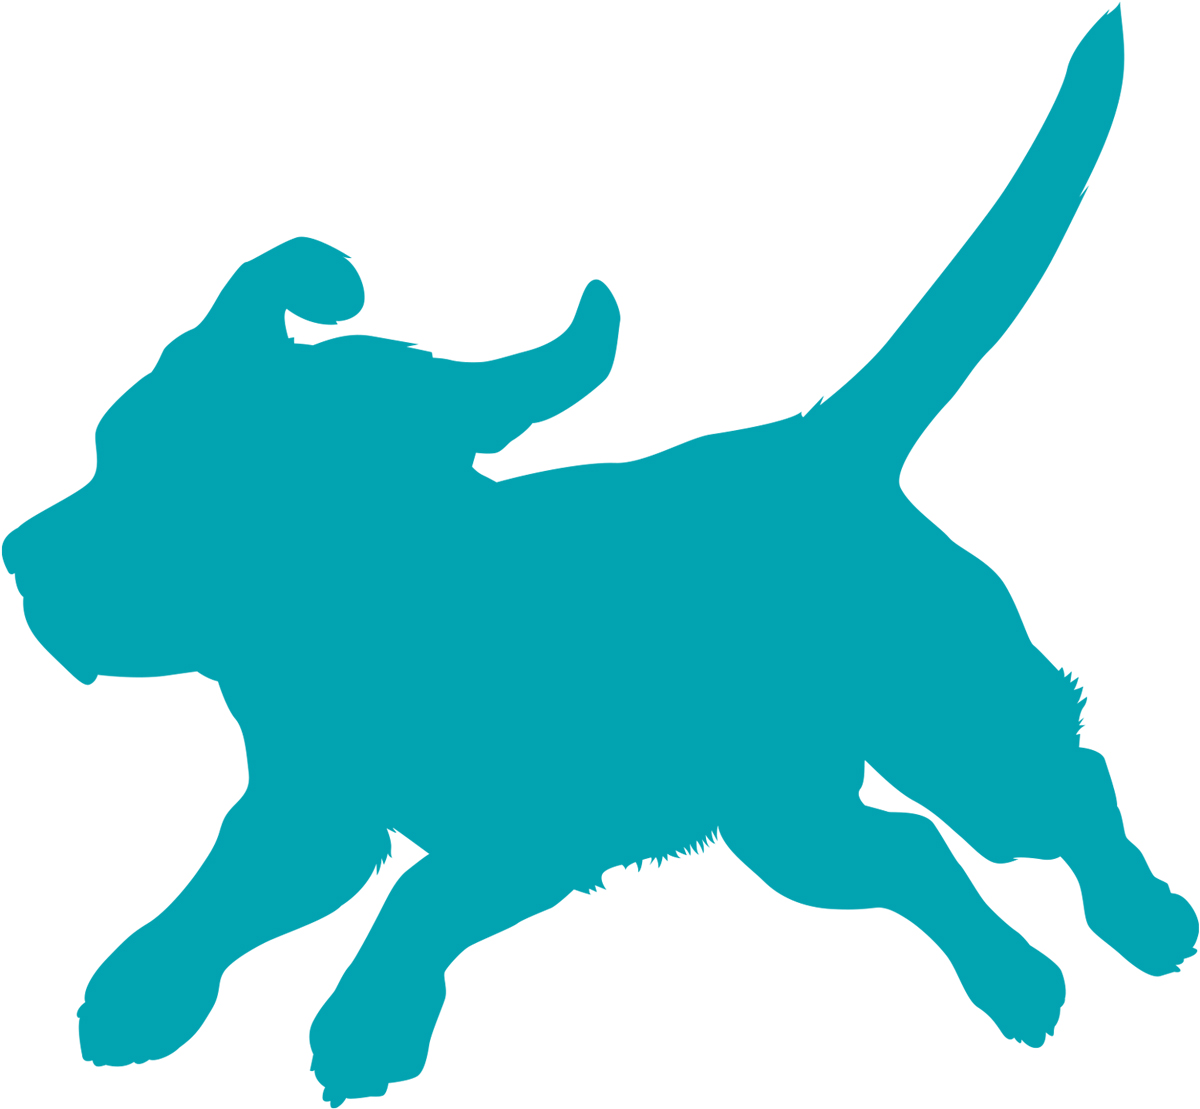 blue silhouette of a dog in mid leap